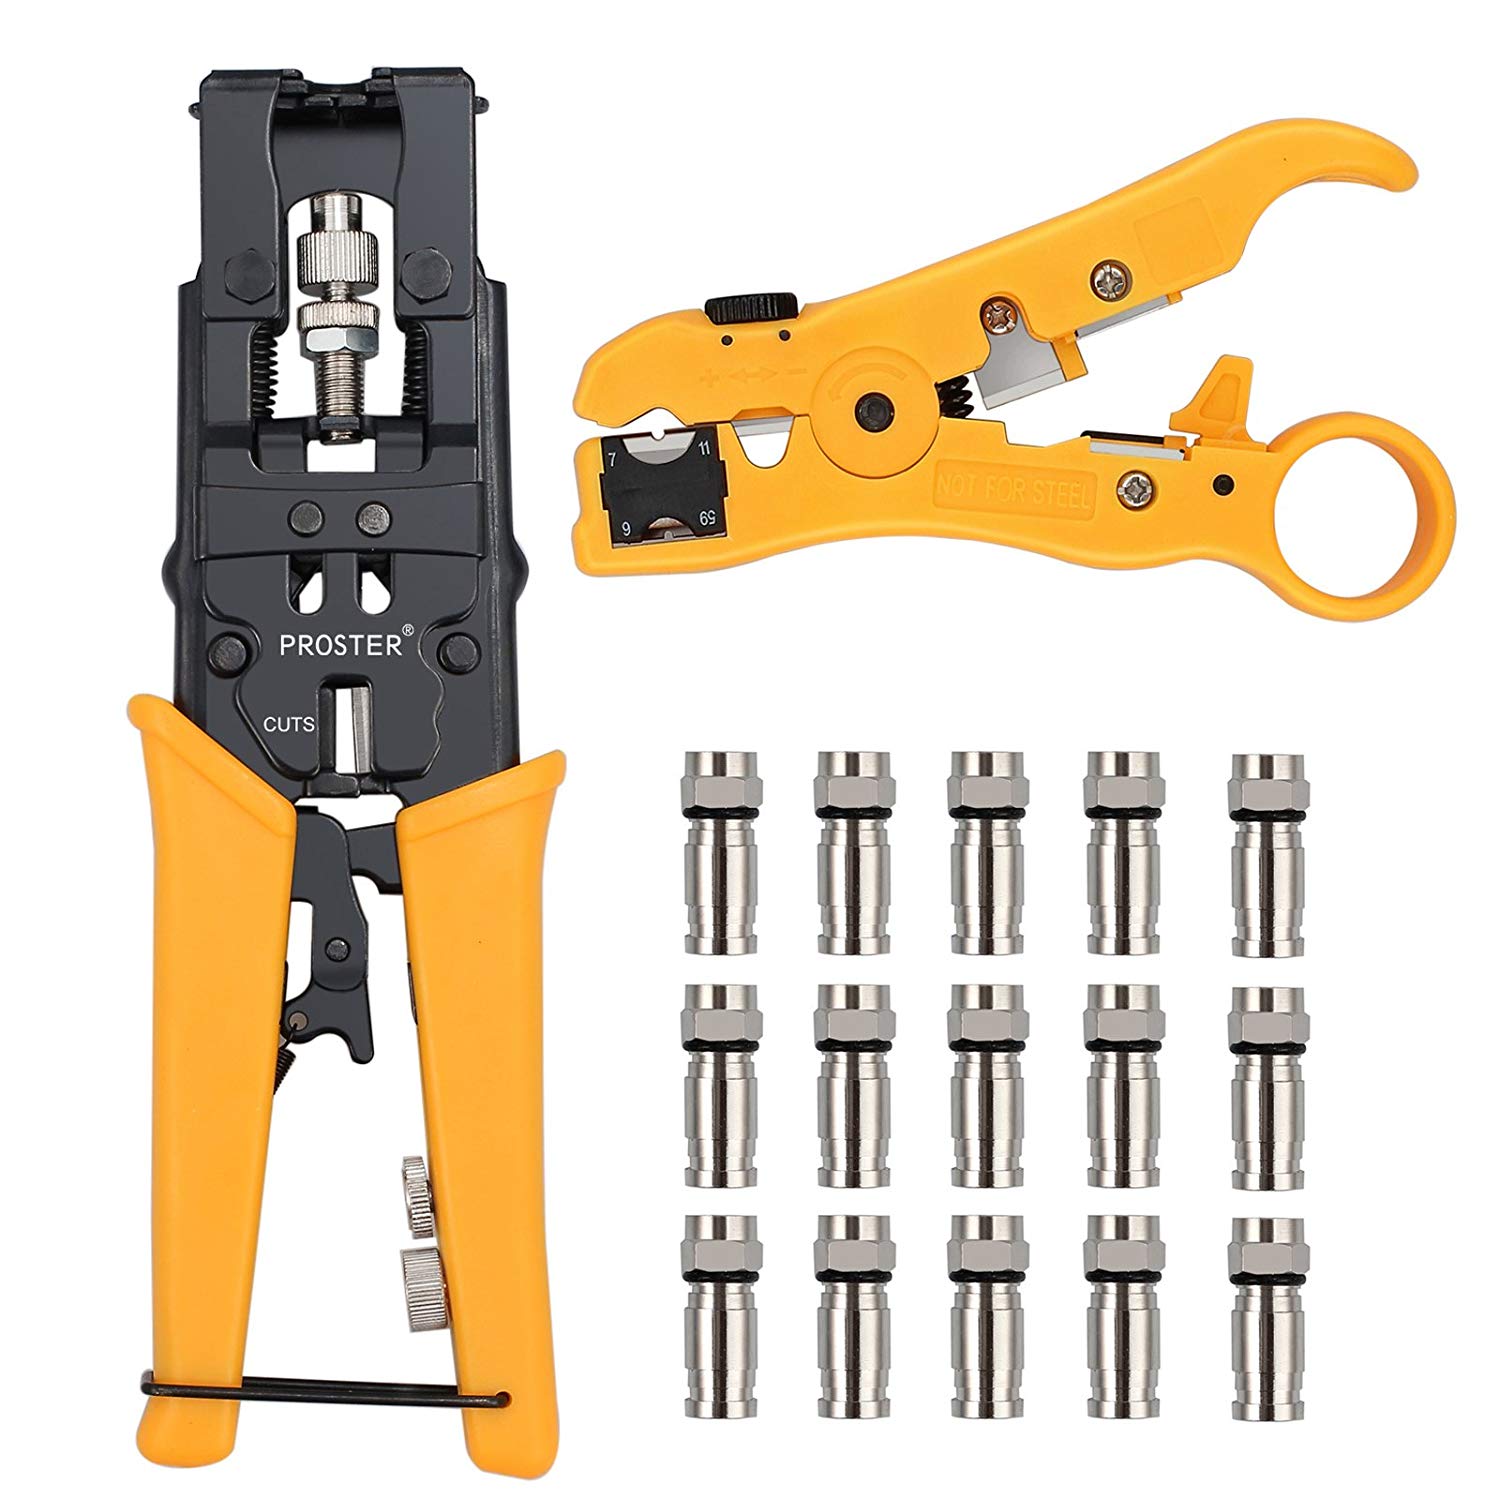 Proster Coaxial Crimping Stripping Multifunctional Coaxial Tool Kit Crimp Coax Cable Stripping Coaxial Crimper RG59 RG6 F BNC RCA Compression Connector Cable Stripping Wire Cutters.